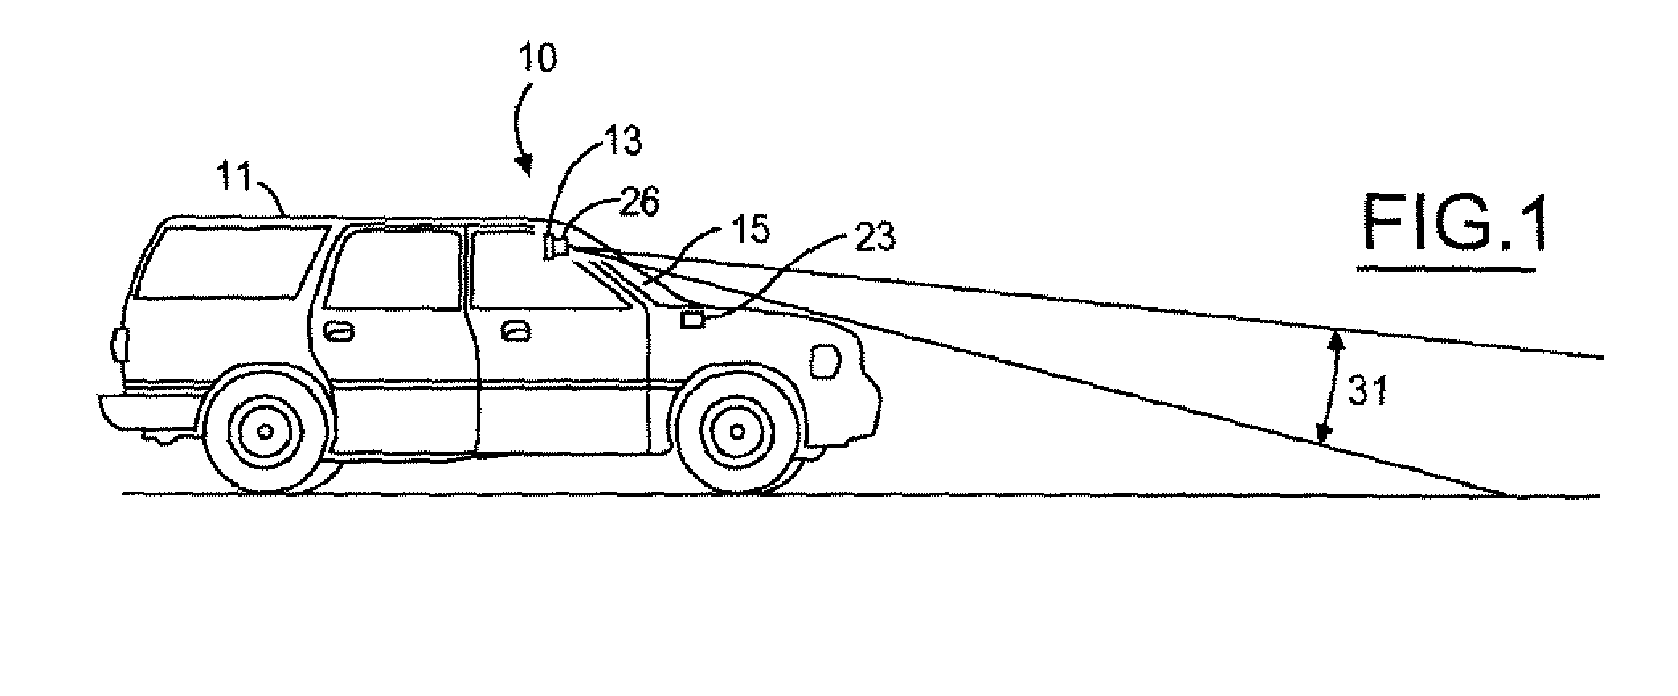 Vehicle imaging processing system and method